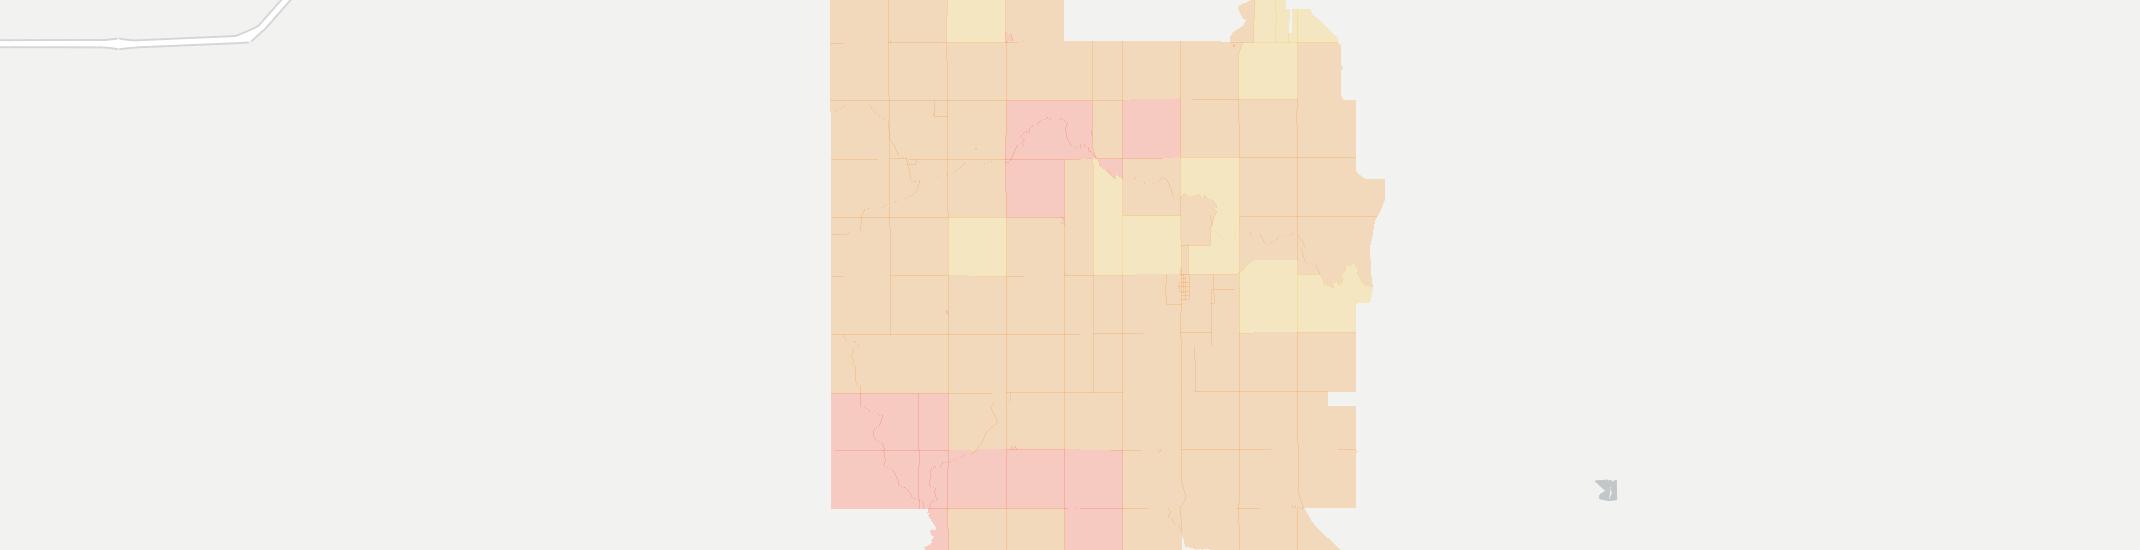 Ostrander Internet Competition Map. Click for interactive map.